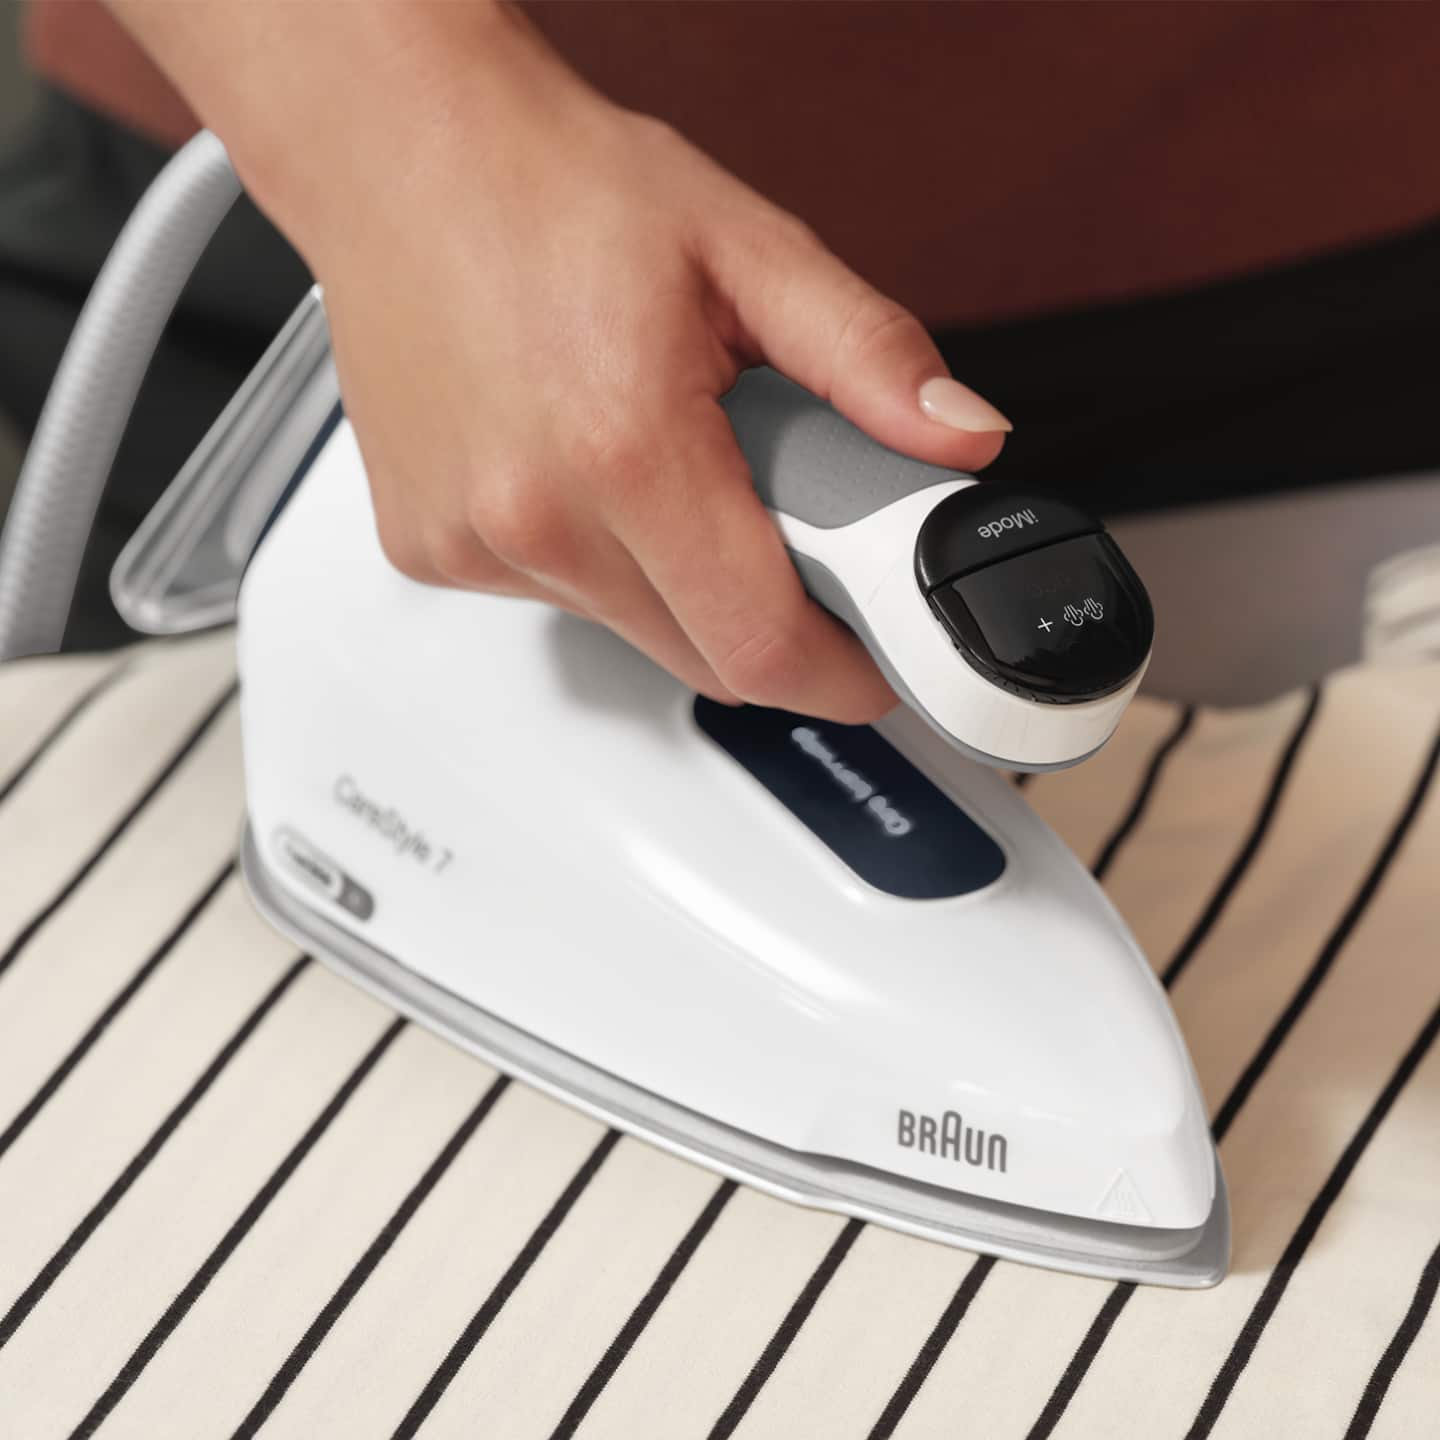  A person ironing a shirt with Braun CareStyle 7 iron.